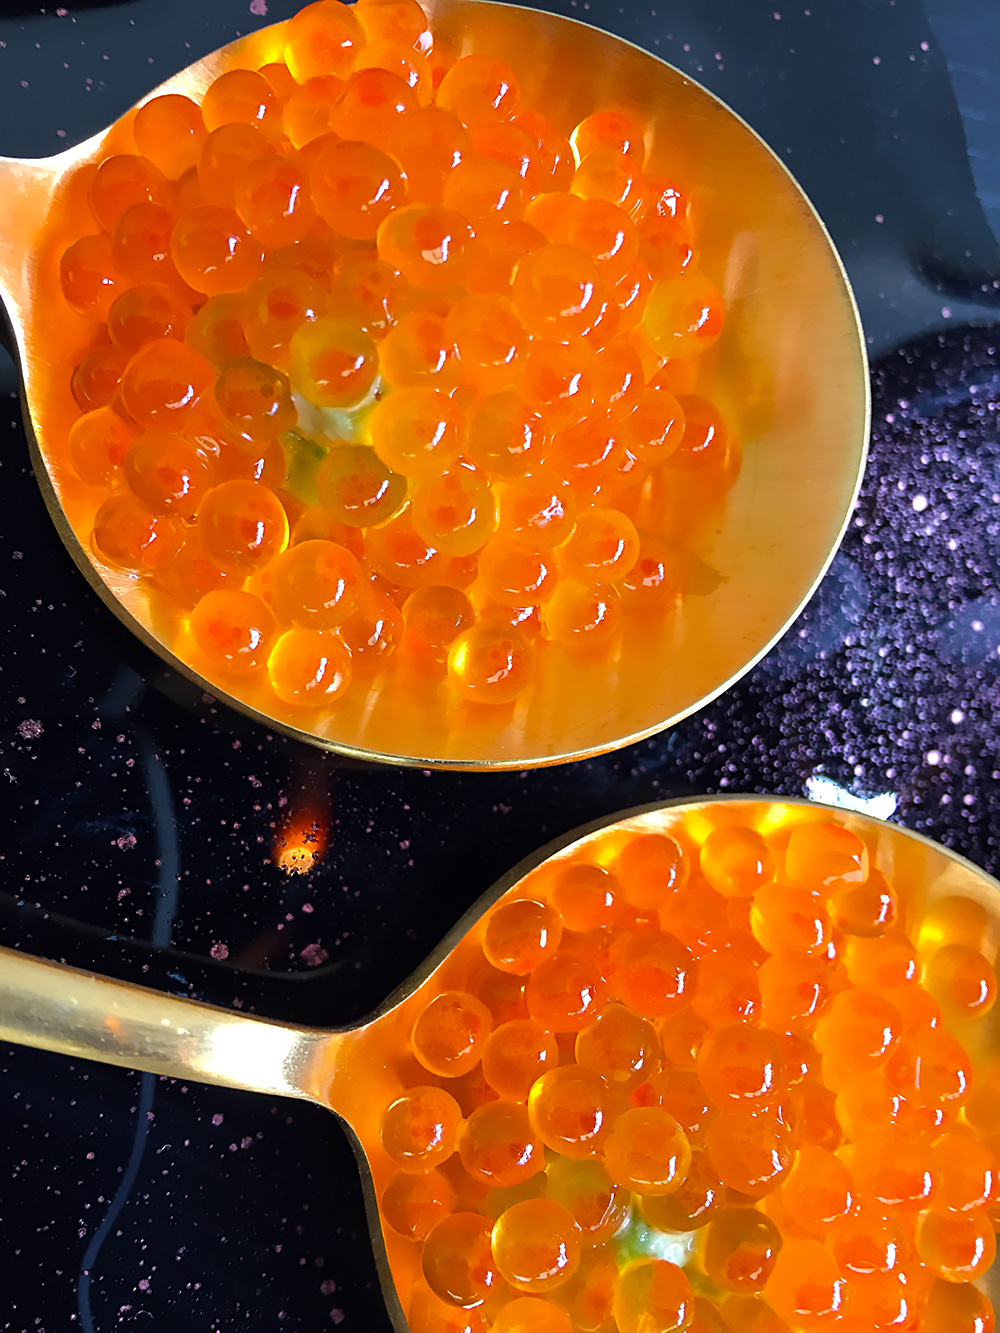 Smoked trout roe hiding an aioli-like concoction made of whipped avocado and sesame